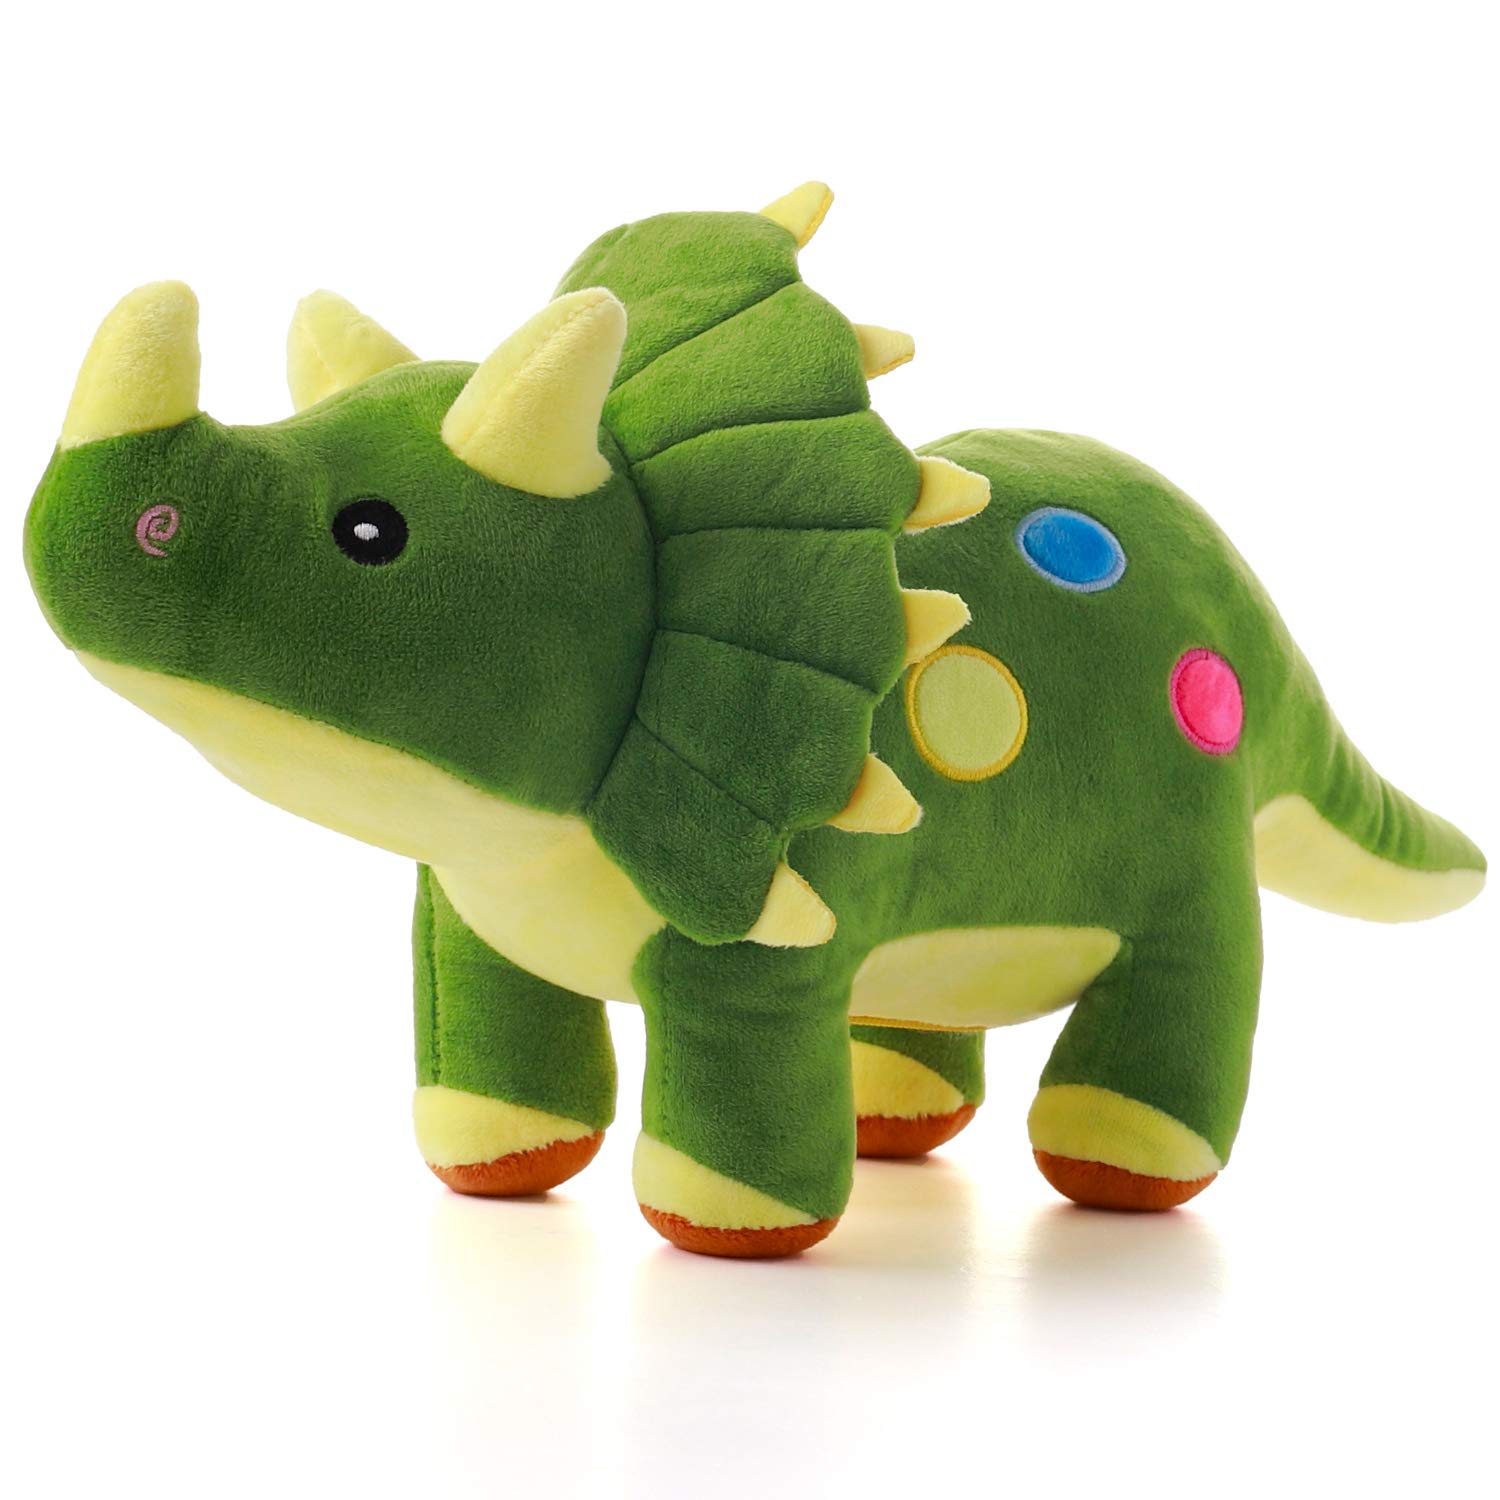 Dinosaur Plush Toy, 40 cm Stuffed Animal Triceratops Throw Plushie Pillow Doll, Soft Green Fluffy Friend Hugging Cushion - Present for Every Age & Occasion